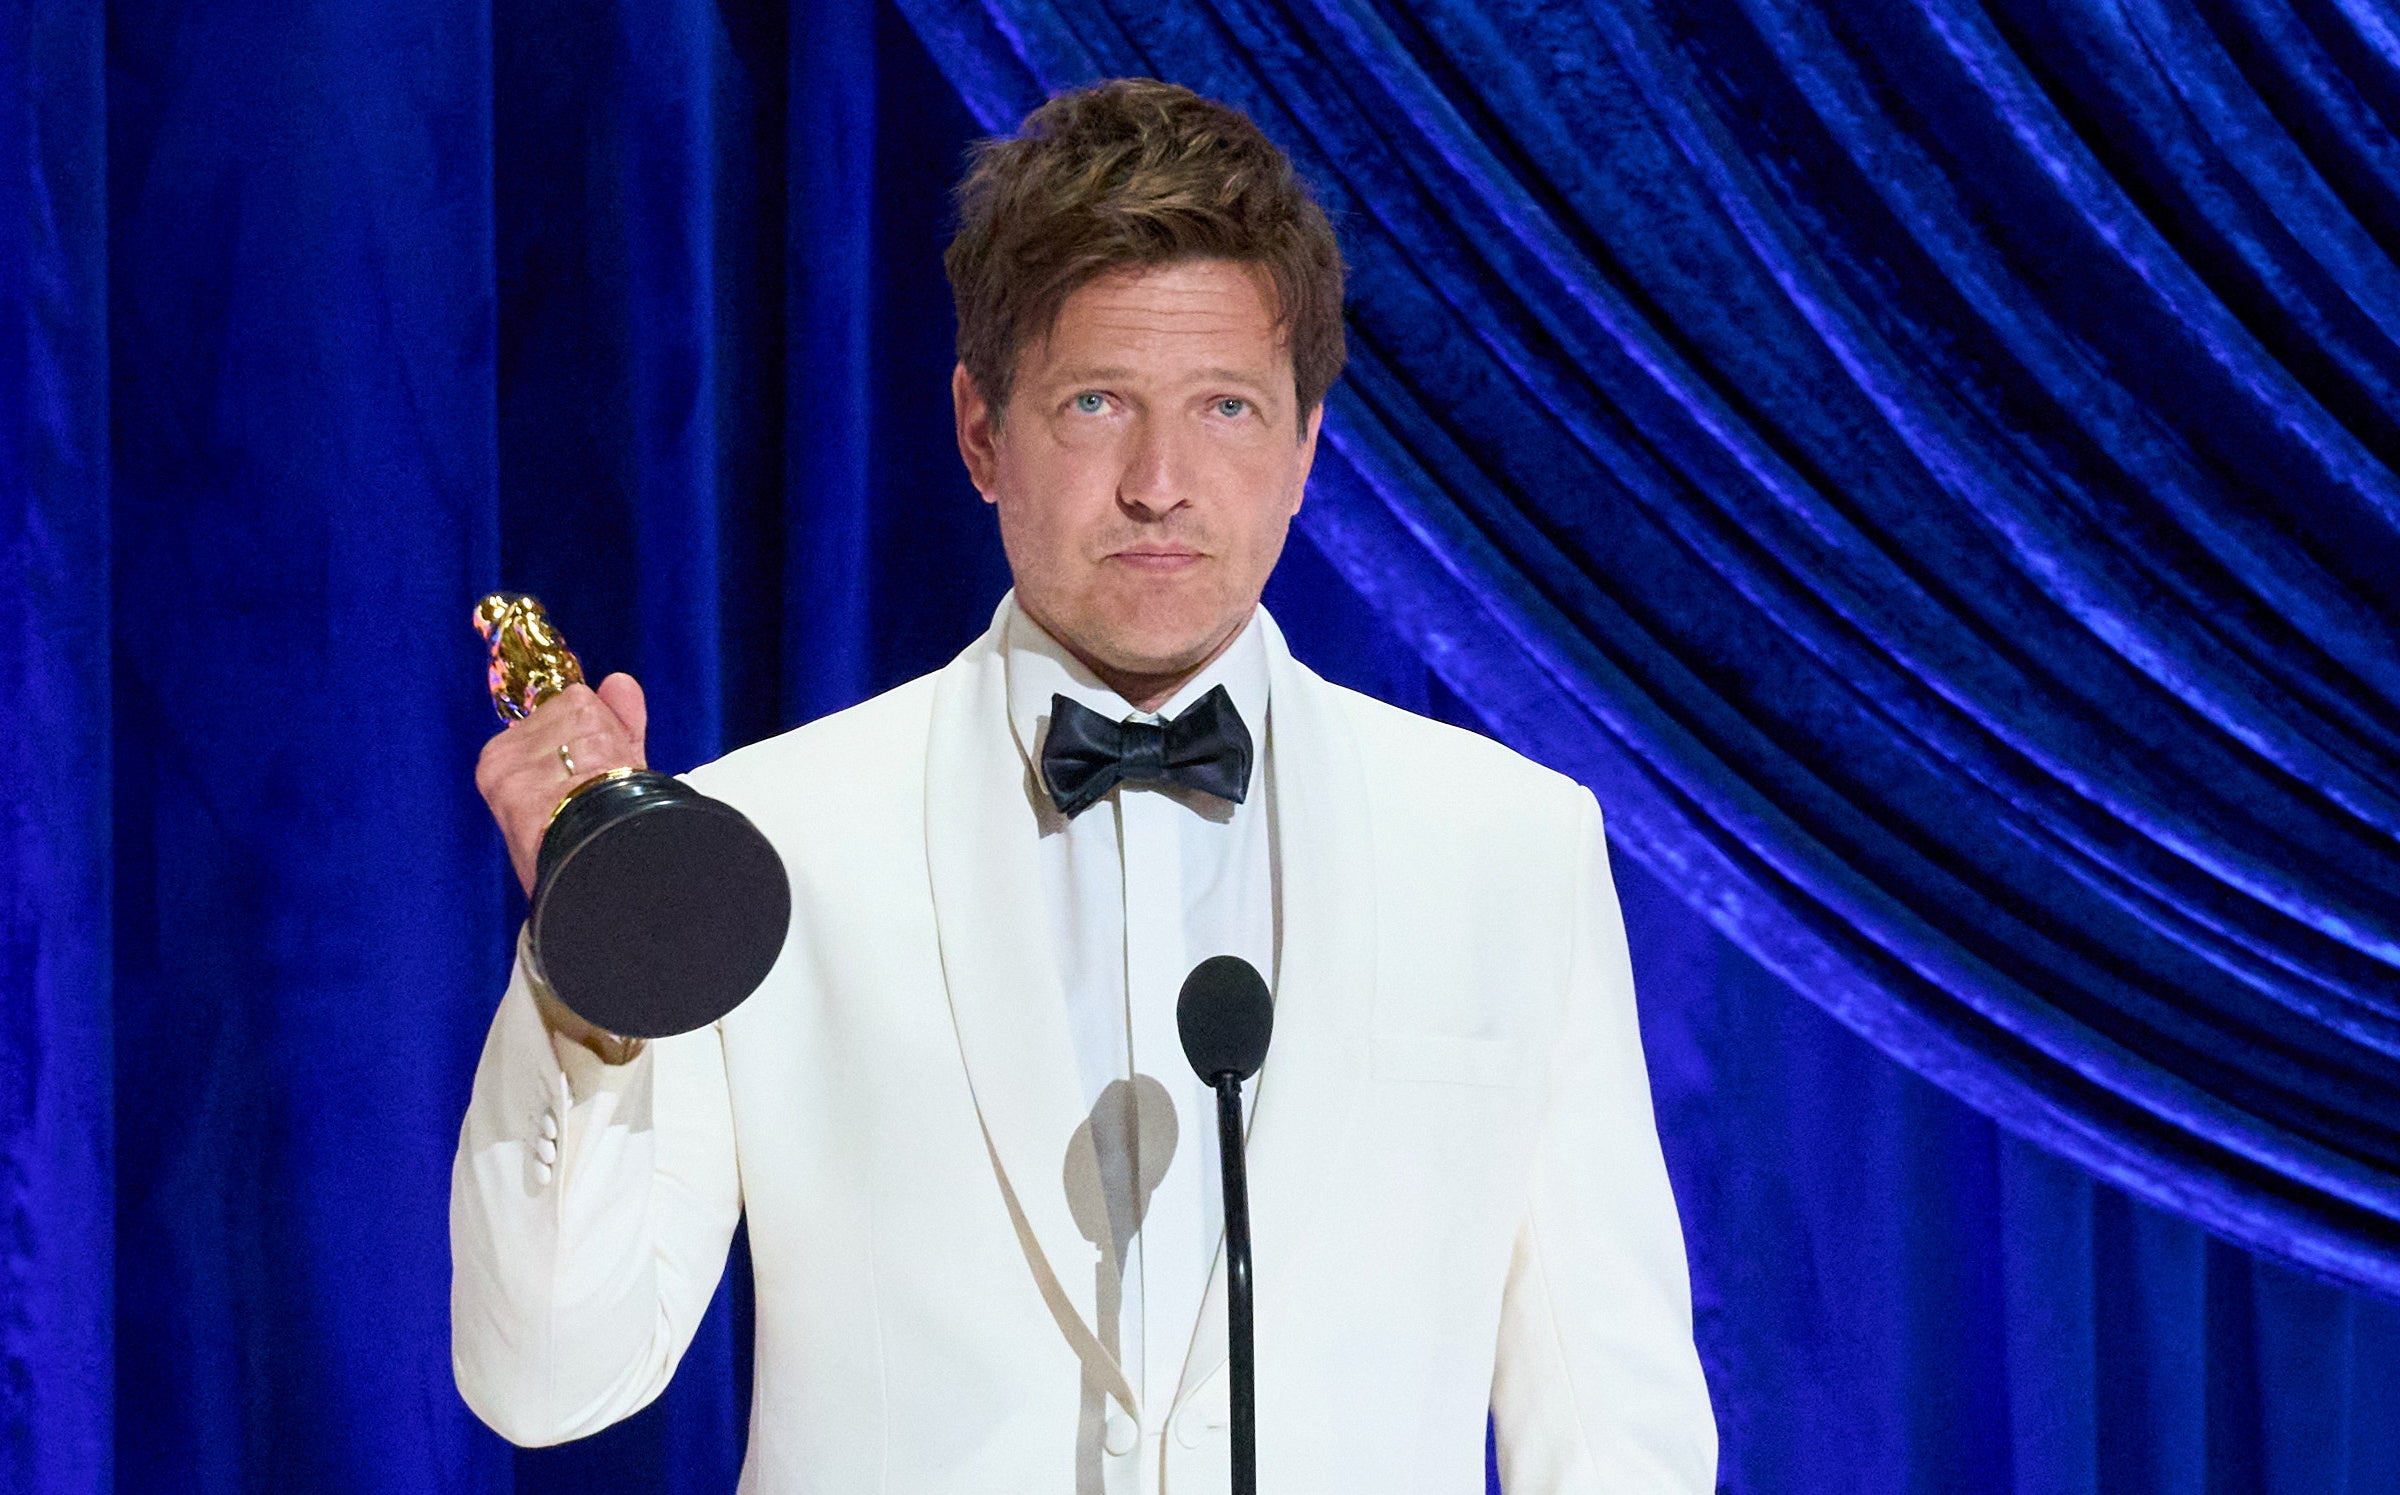 ‘Another Round’ director Thomas Vinterberg accepts the Oscar for Best International Feature Film